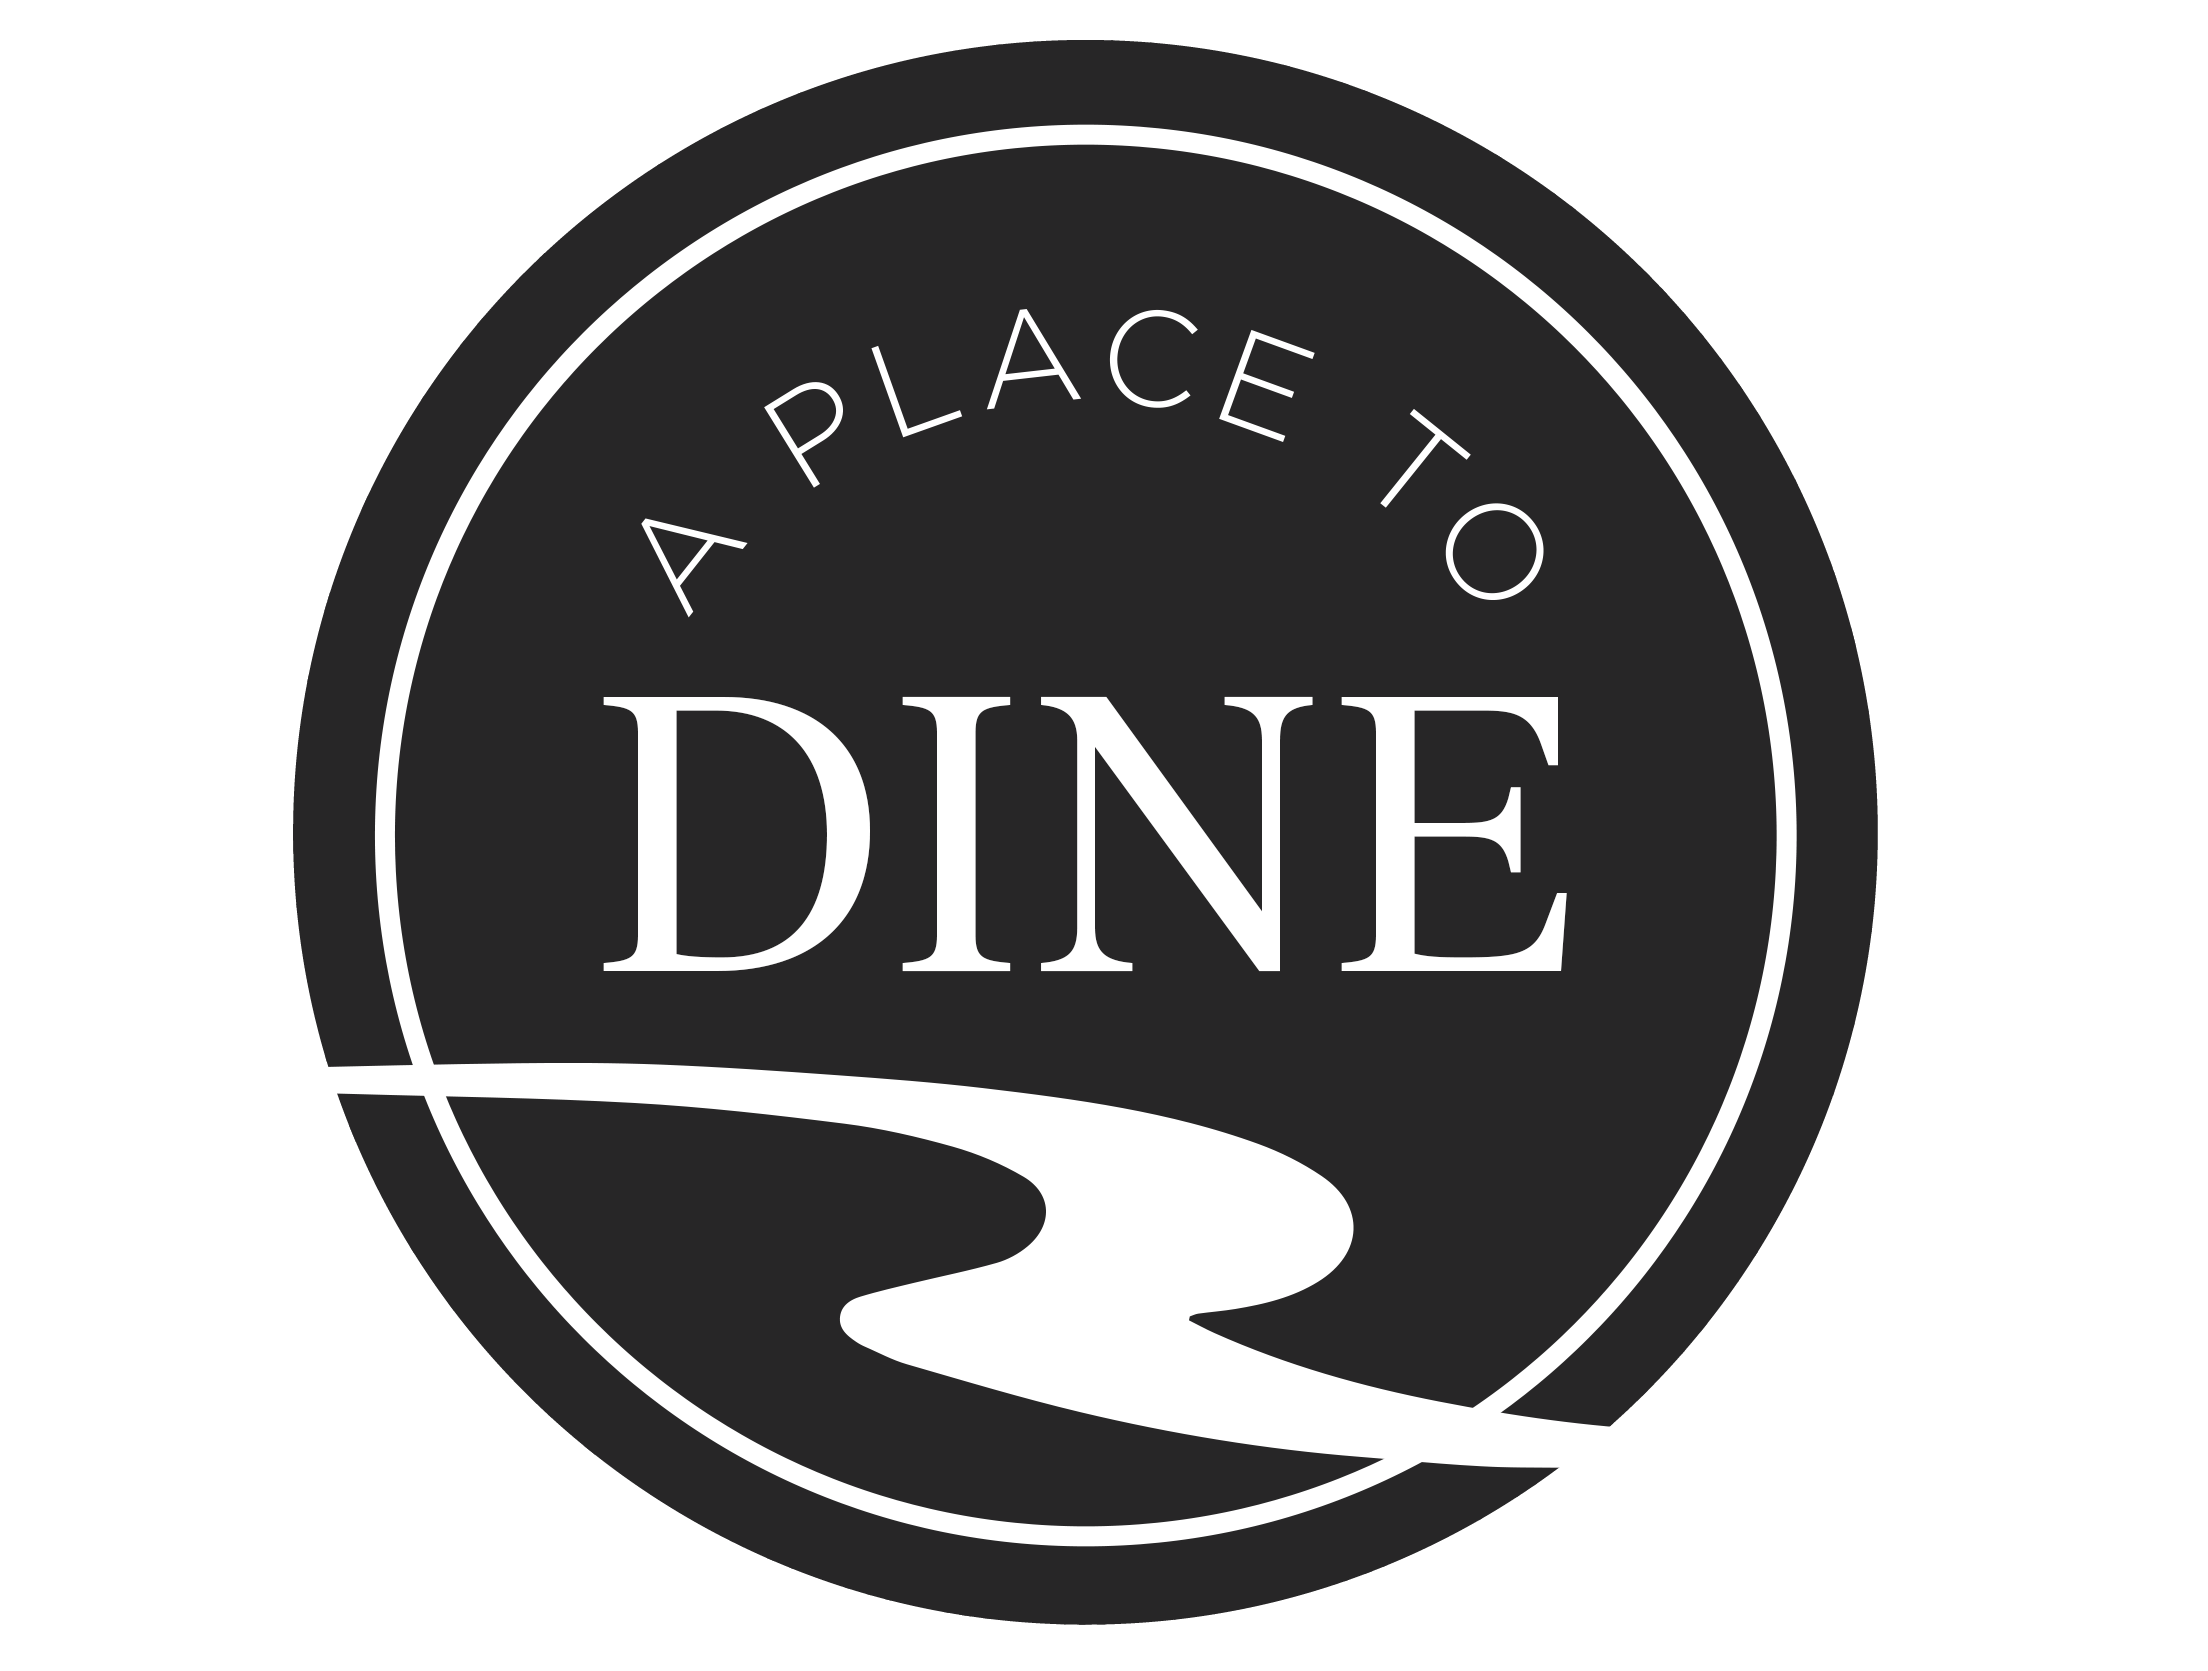 A PLACE TO DINE